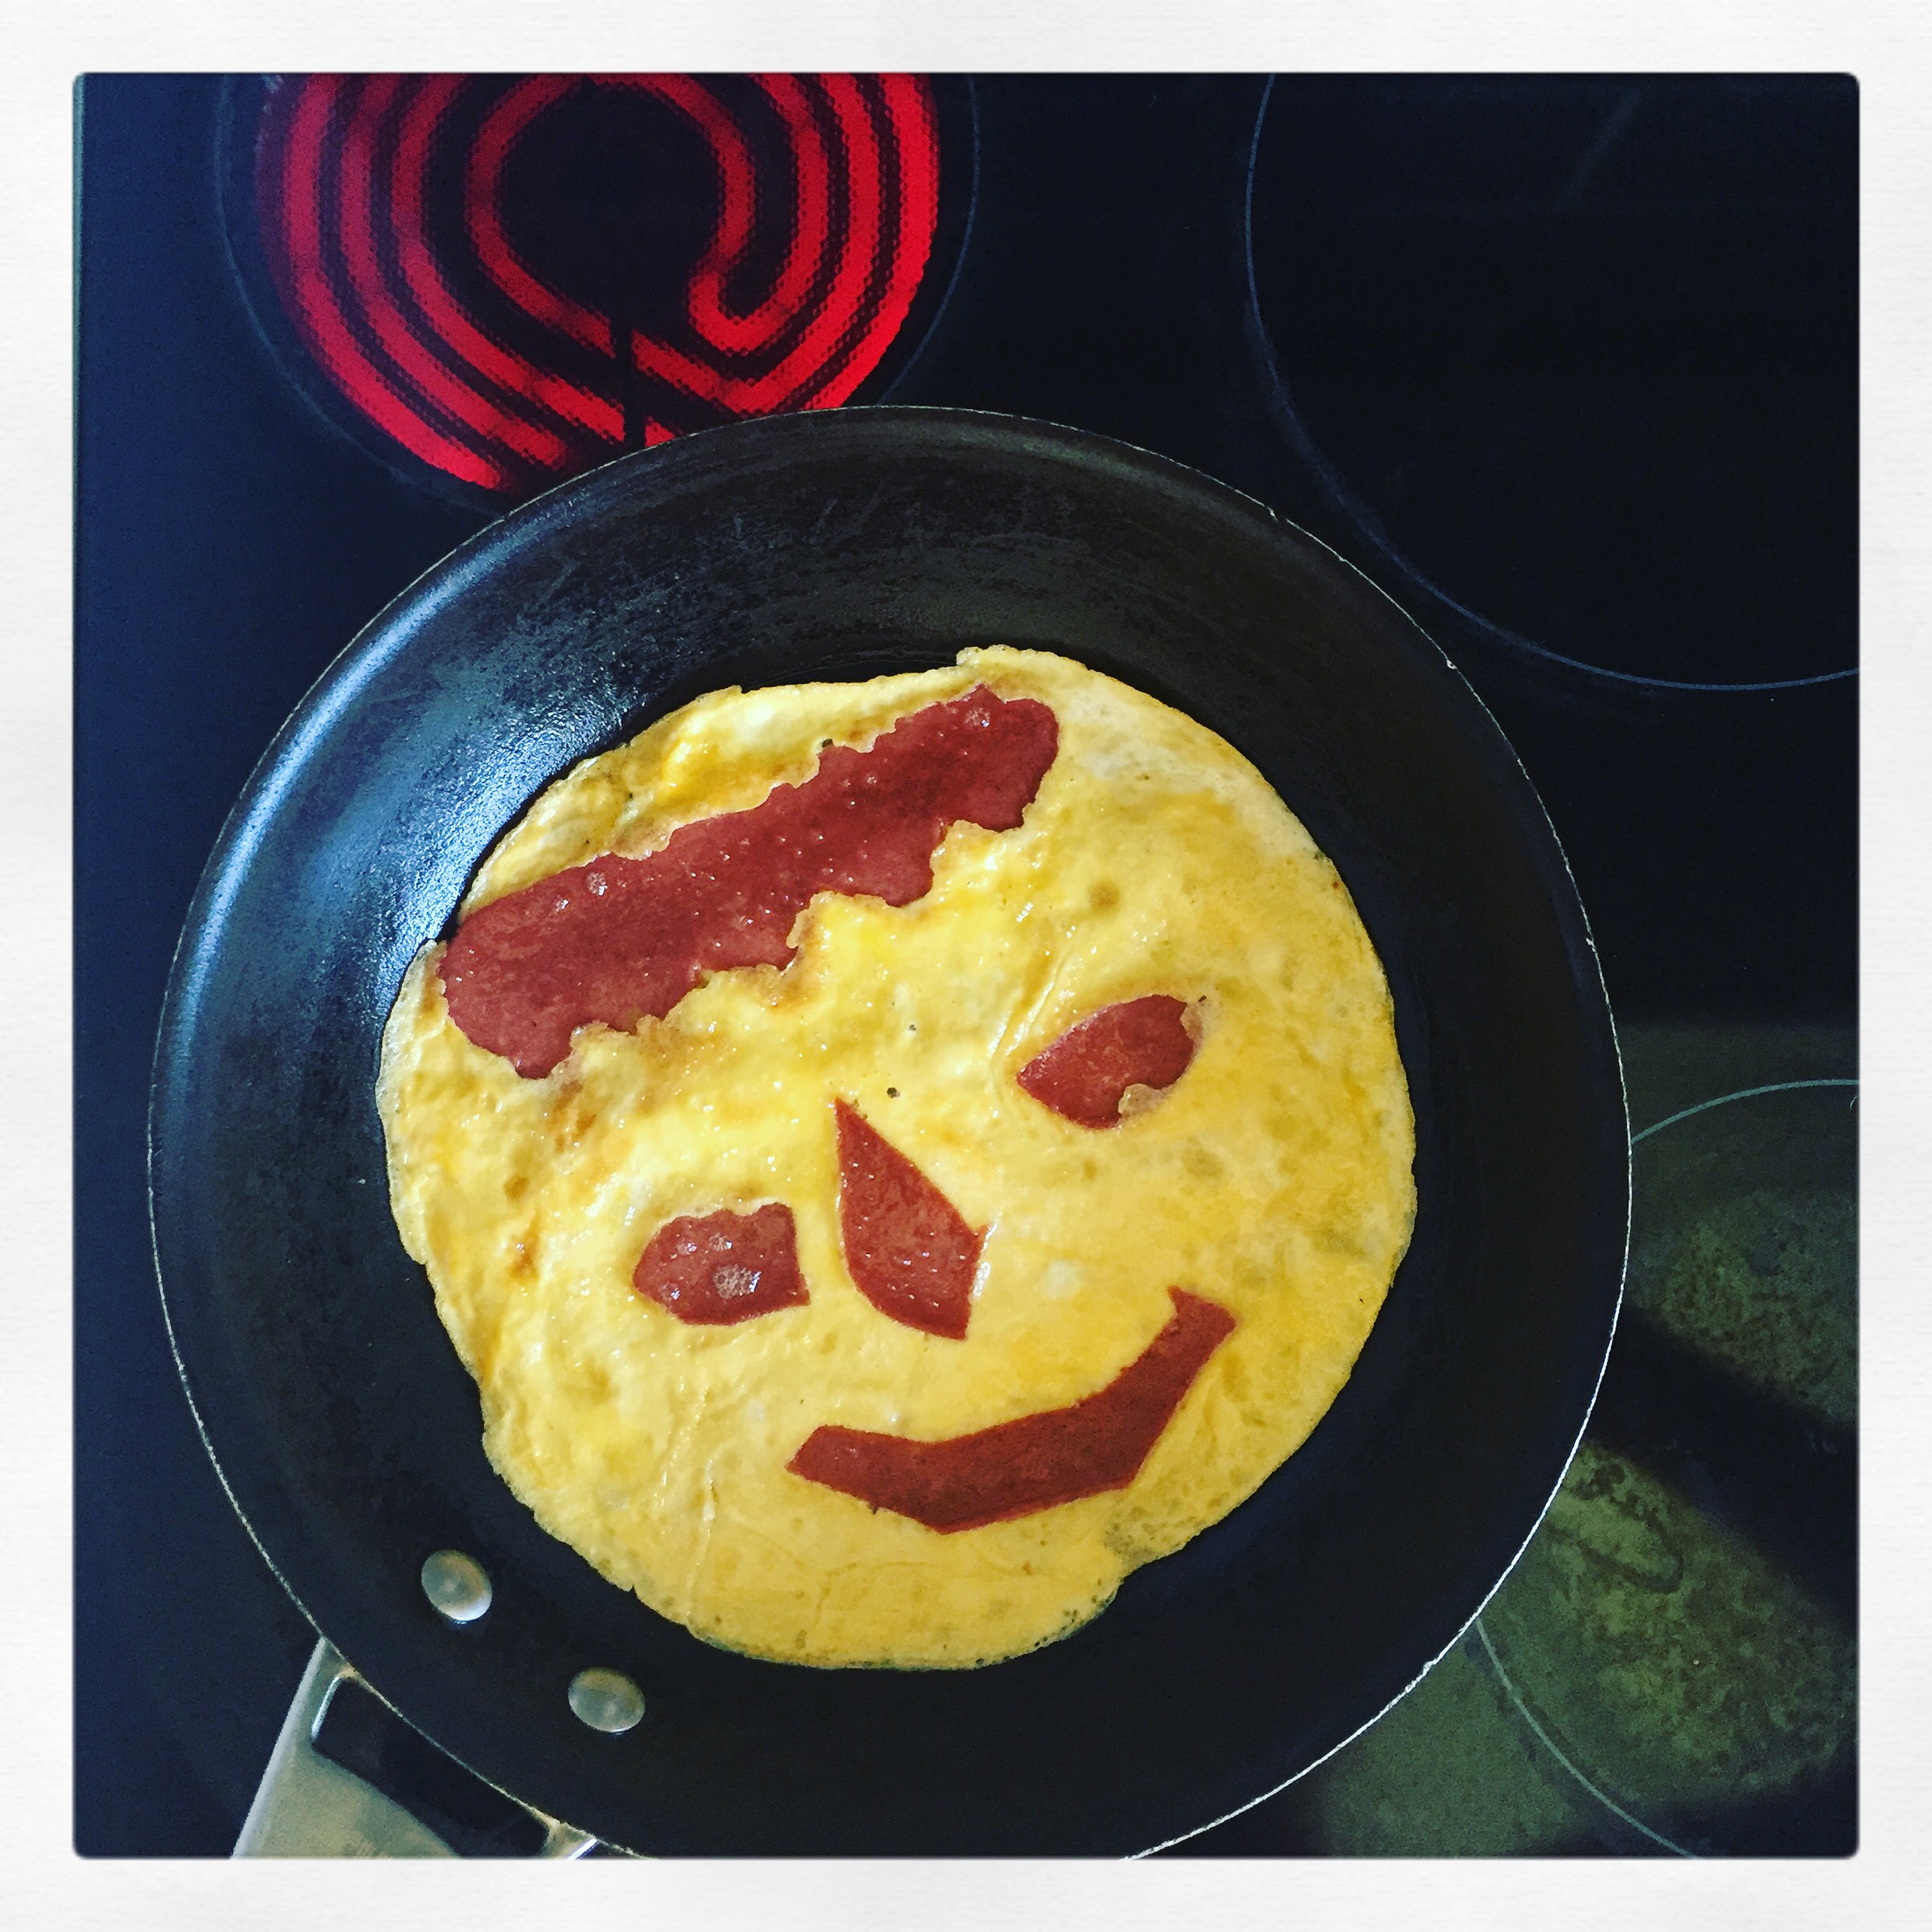 Crazy omelettes